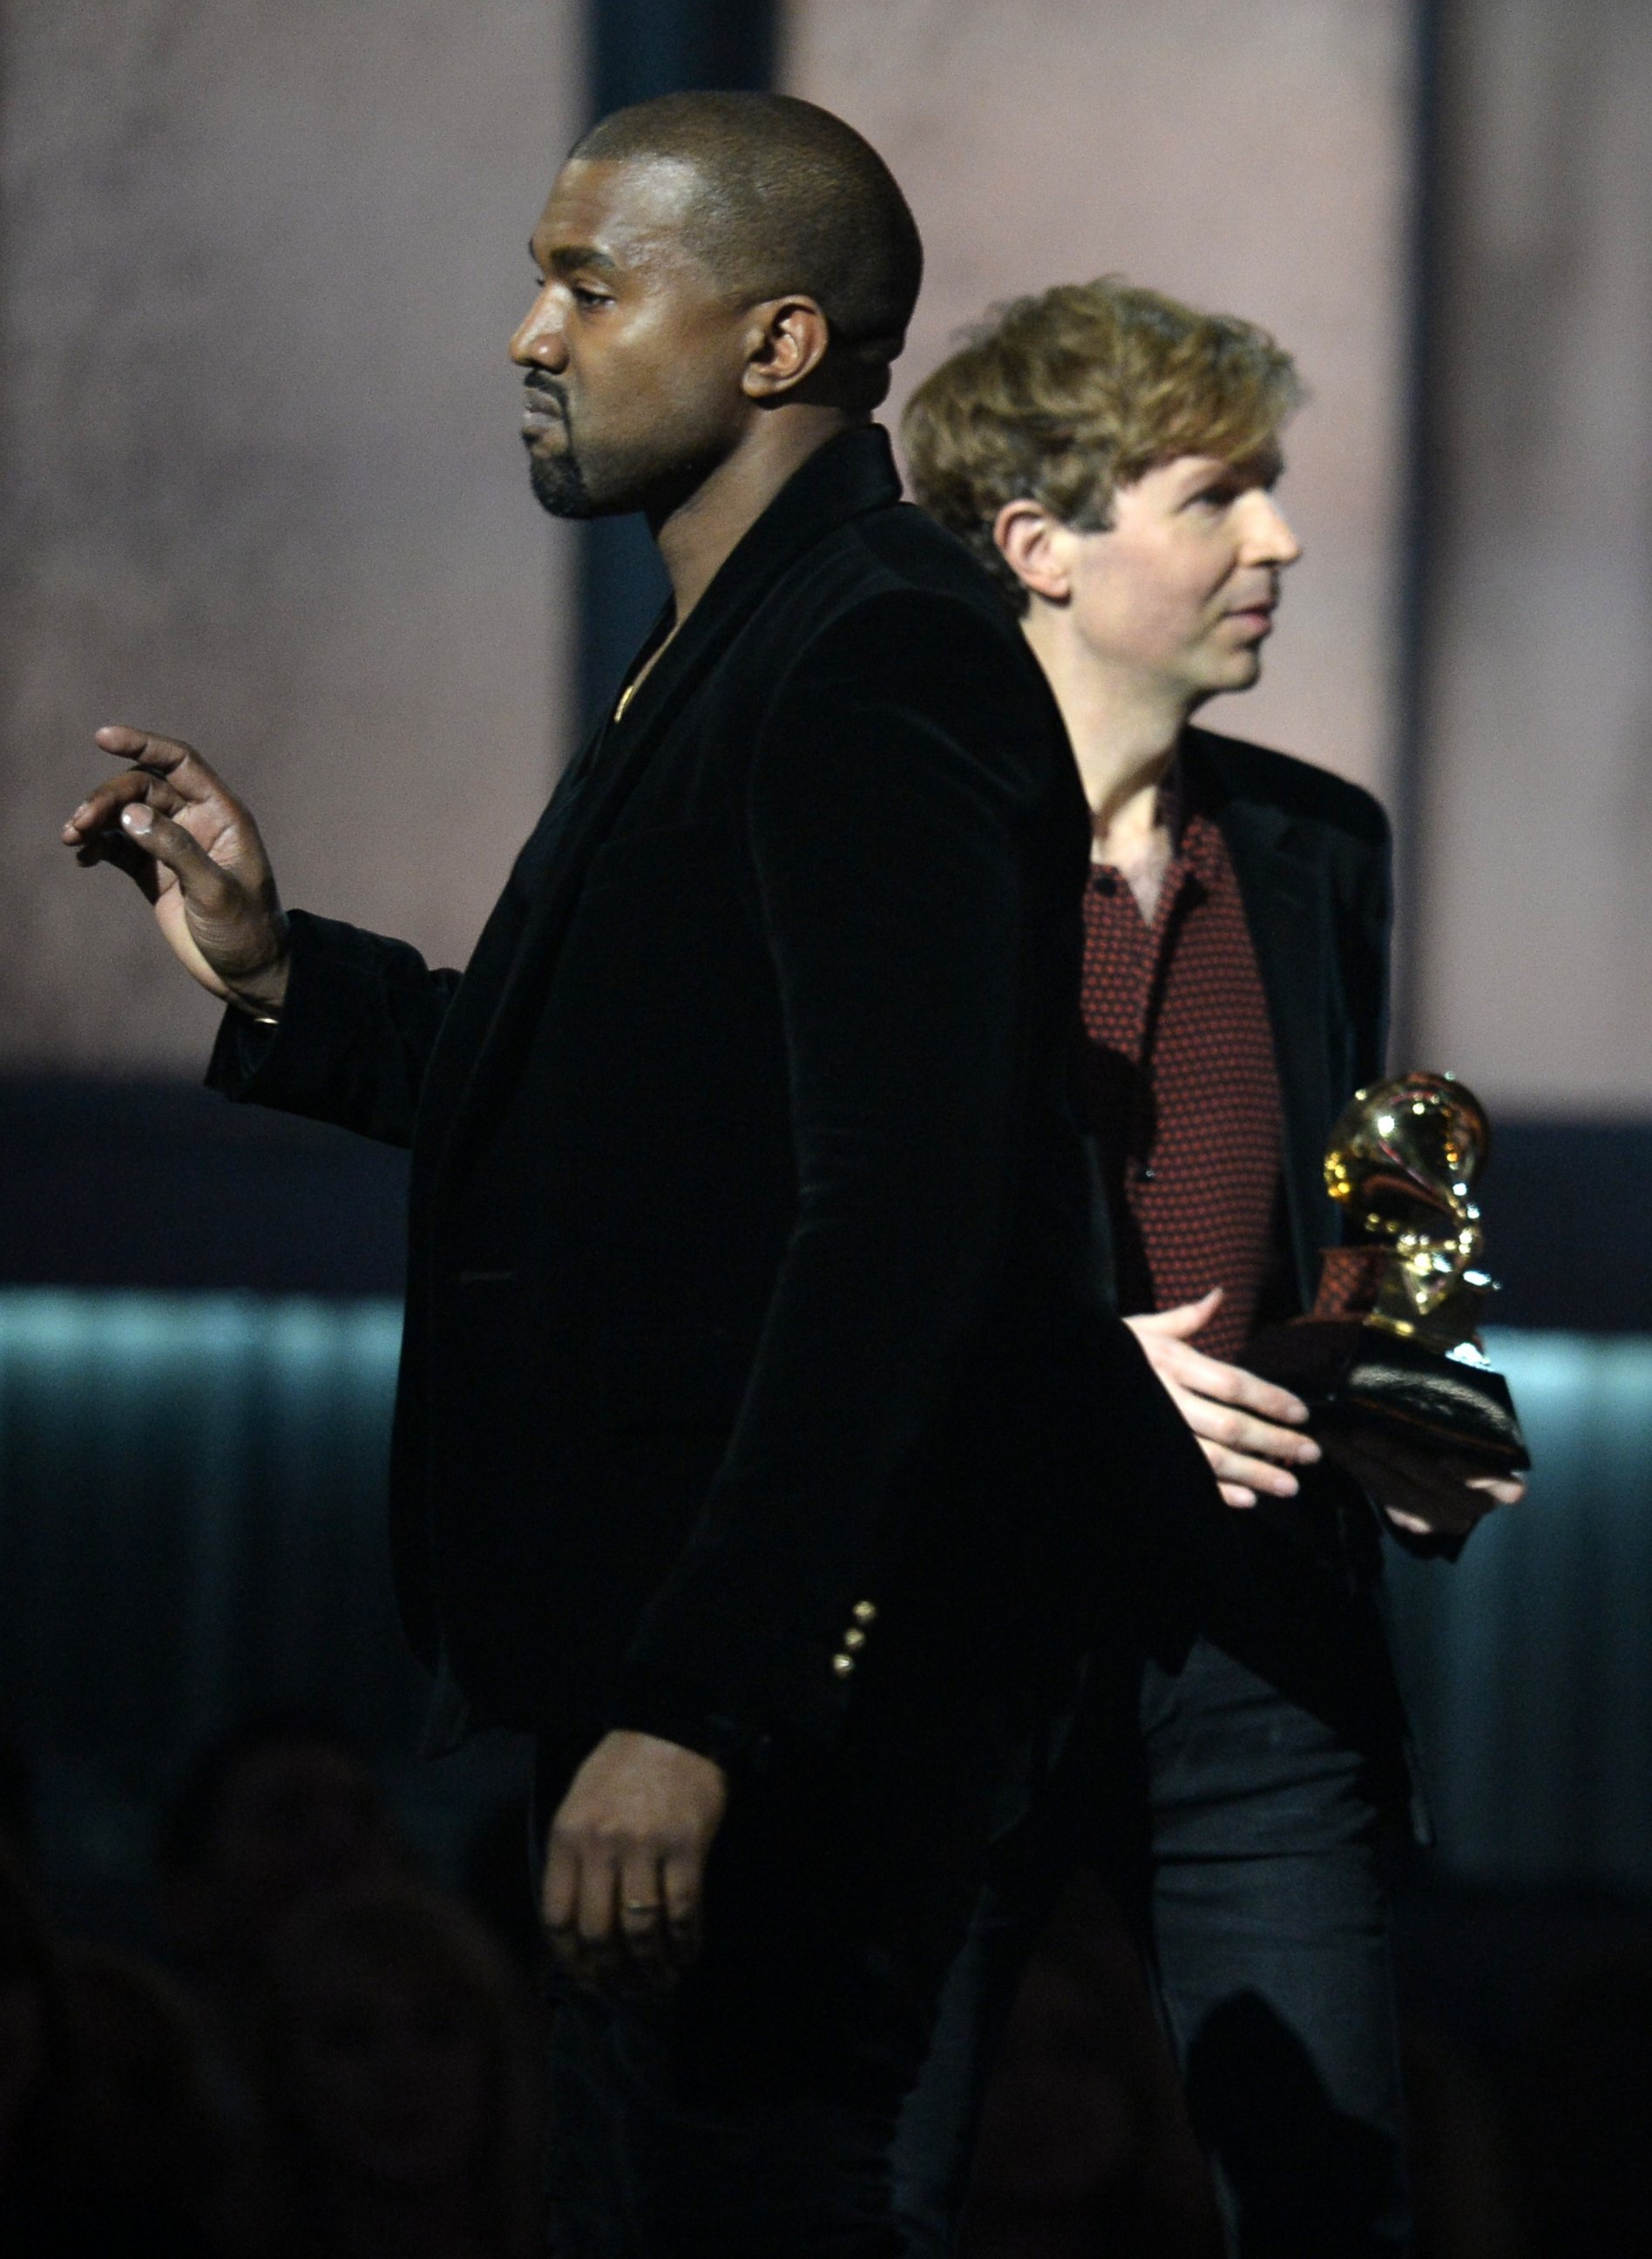 PHOTO: Winner for Album Of The Year Beck reacts as Kanye West appears on stage at the 57th Annual Grammy Awards in Los Angeles Feb. 8, 2015.